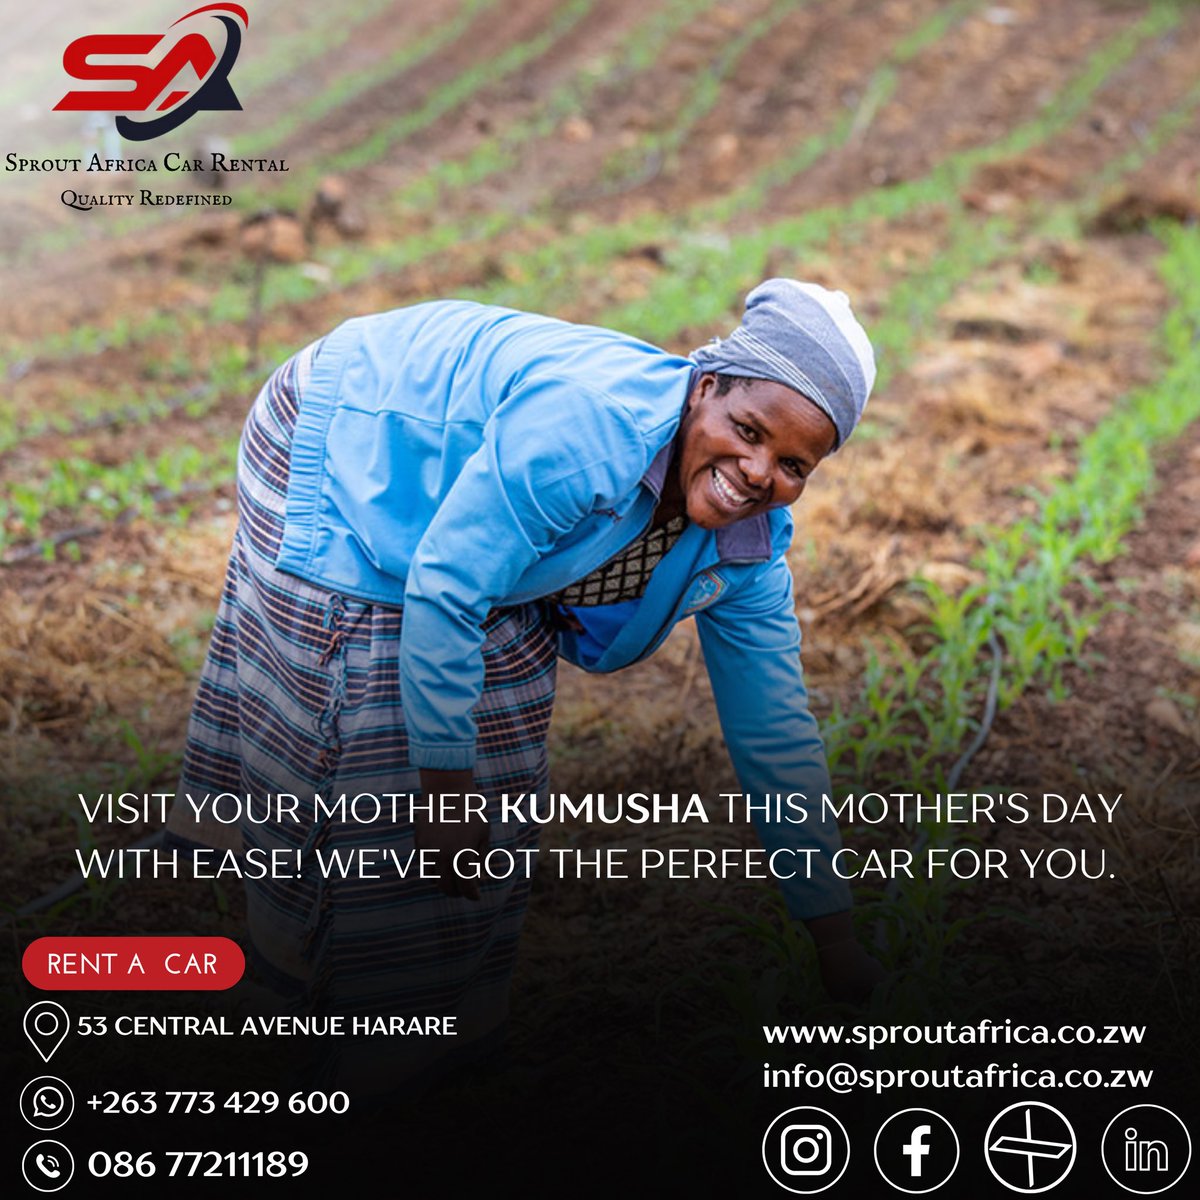 VISIT YOUR MOTHER KUMUSHA THIS MOTHER’S DAY WITH EASE! WE’VE GOT THE PERFECT CAR FOR YOU. #MothersDay
#CarRental #RentACar #CarHire #VehicleRental #TransportationSolutions #TreatMomToADrive #MomDeservesARide #DriveMomHappy #harare